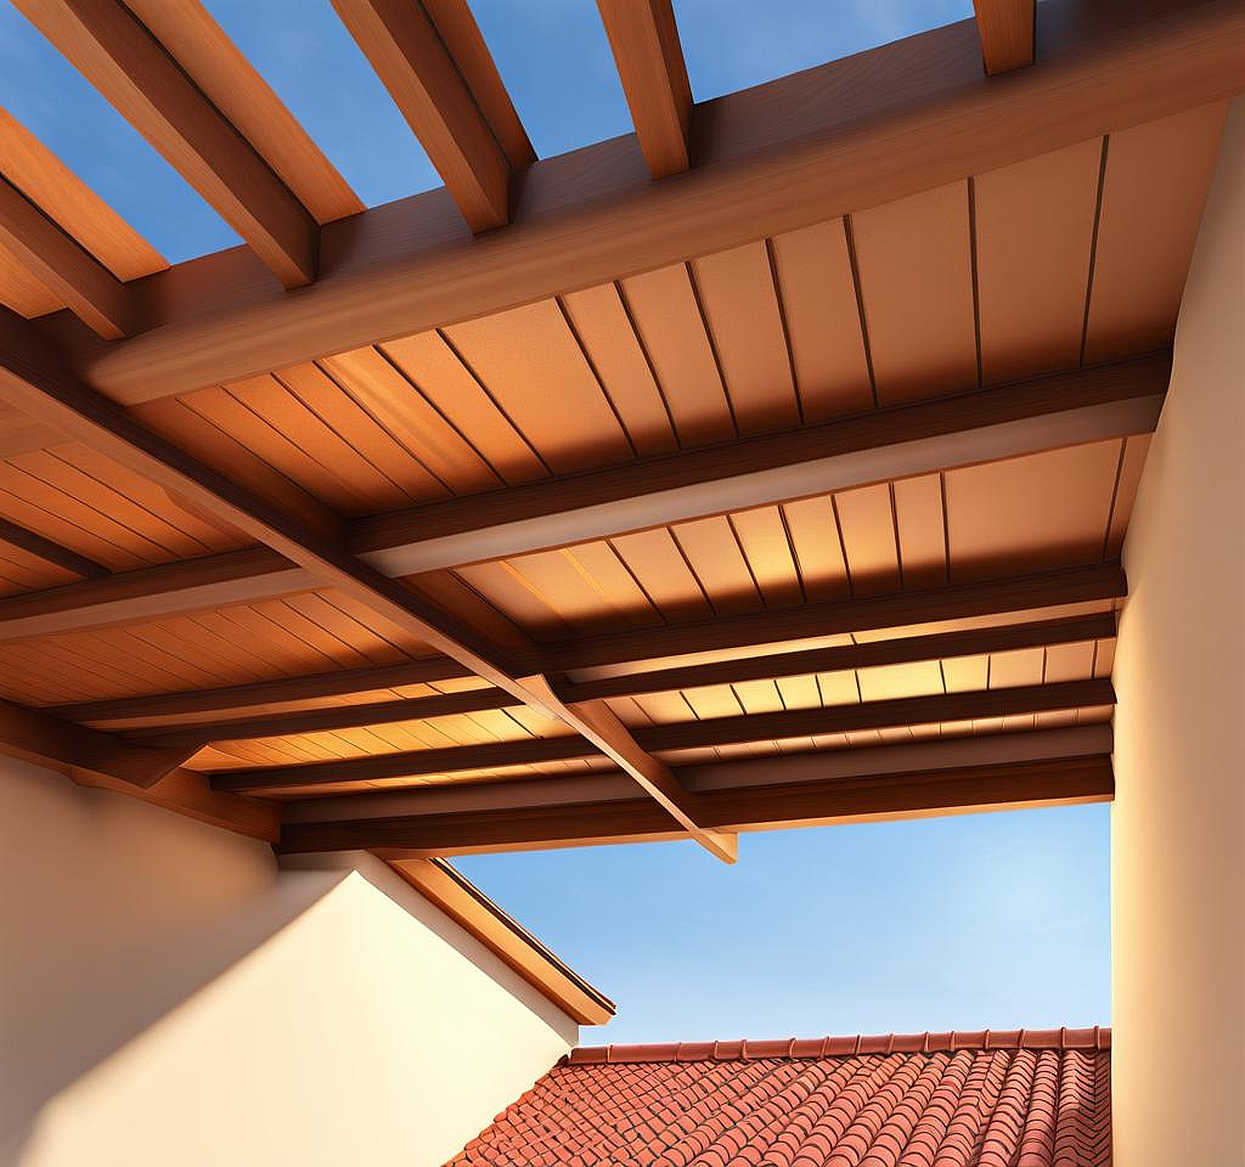 Understanding the Structural Purpose of Overhanging Edges on Roofs